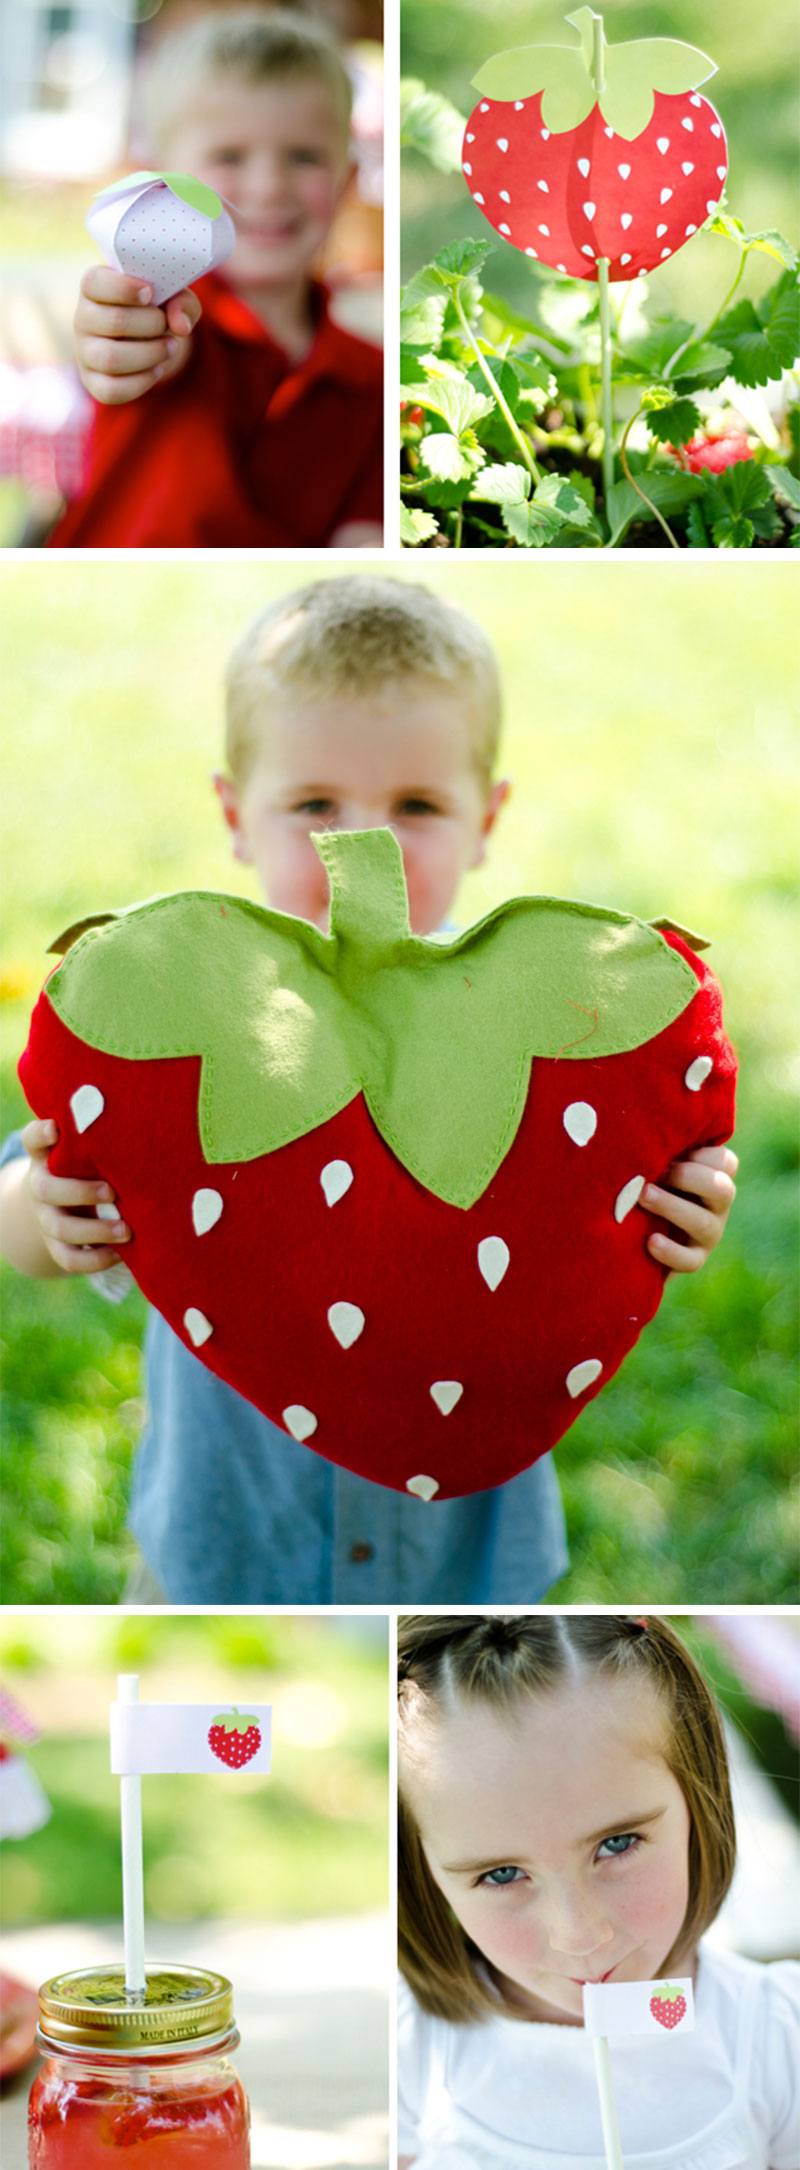 Strawberry Party Ideas by Lindi Haws of Love The Day